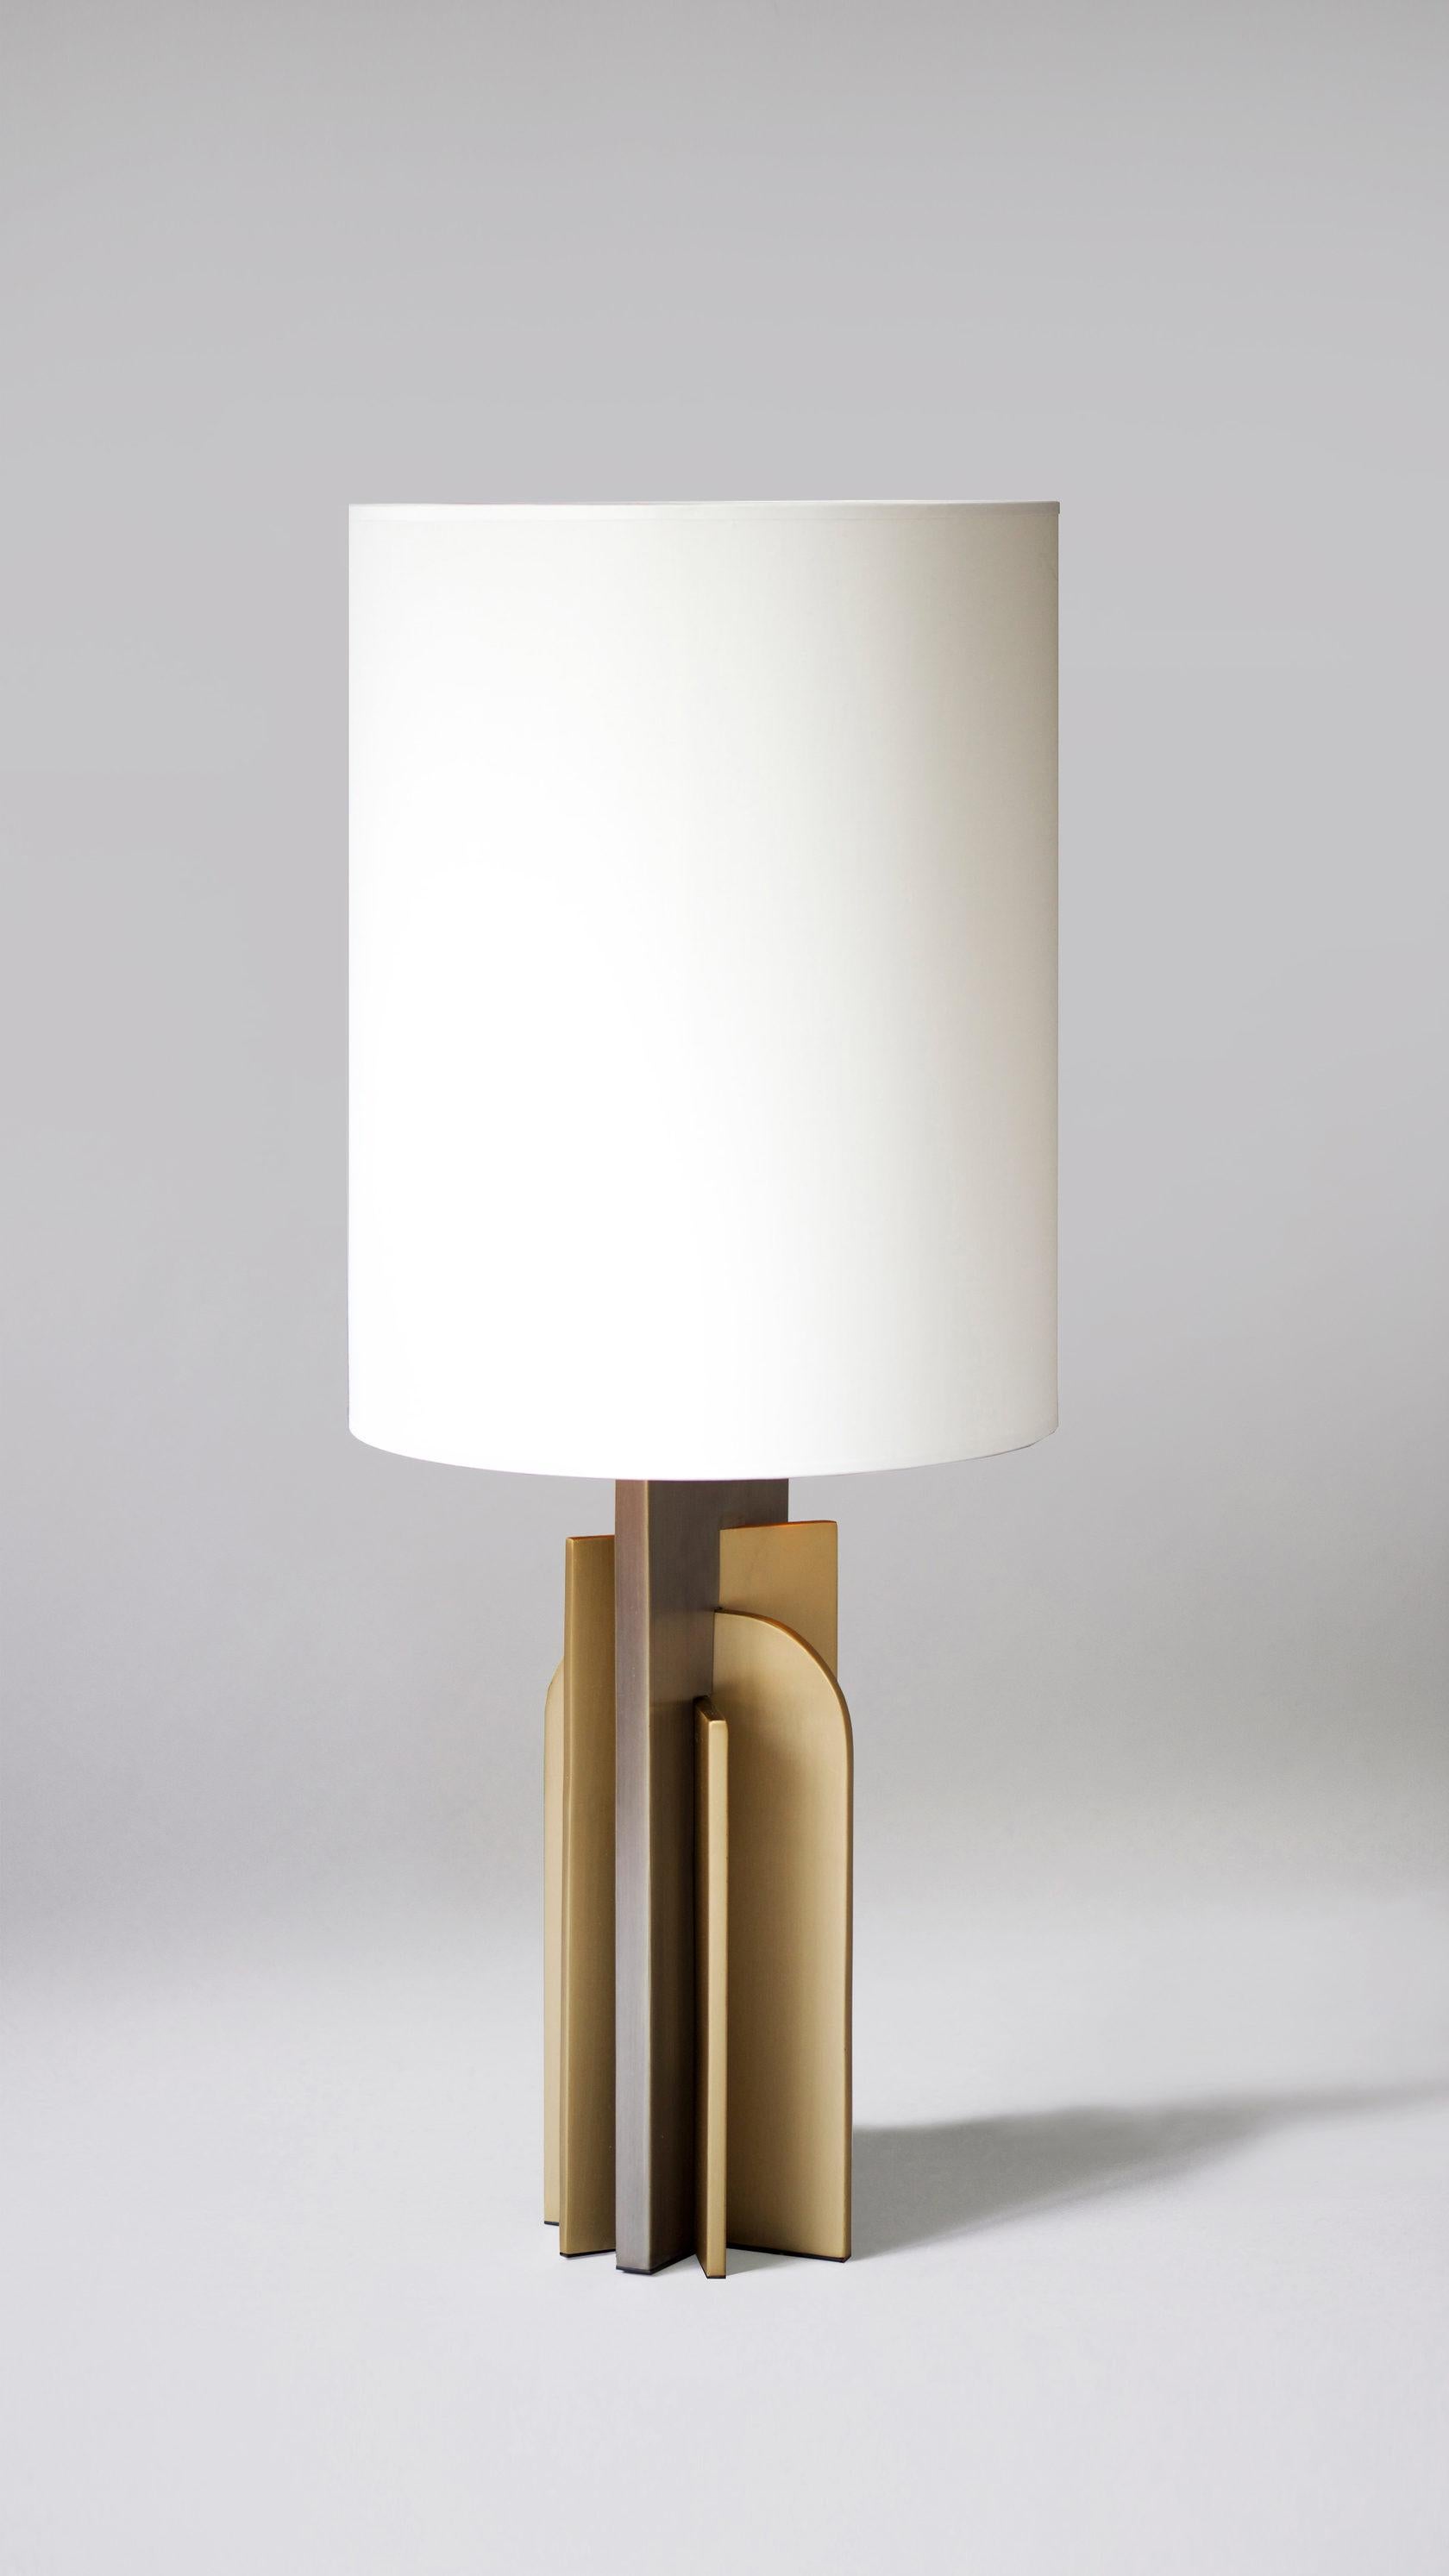 Brass Icon Table Lamp by Square in Circle
Dimensions: 17 W x 14 D x 90 H cm
Materials: Brushed brass finish, brushed dark, grey metal, white cotton shade with gold linning 

A modernist oversized table lamp. The base is crafted according to striking